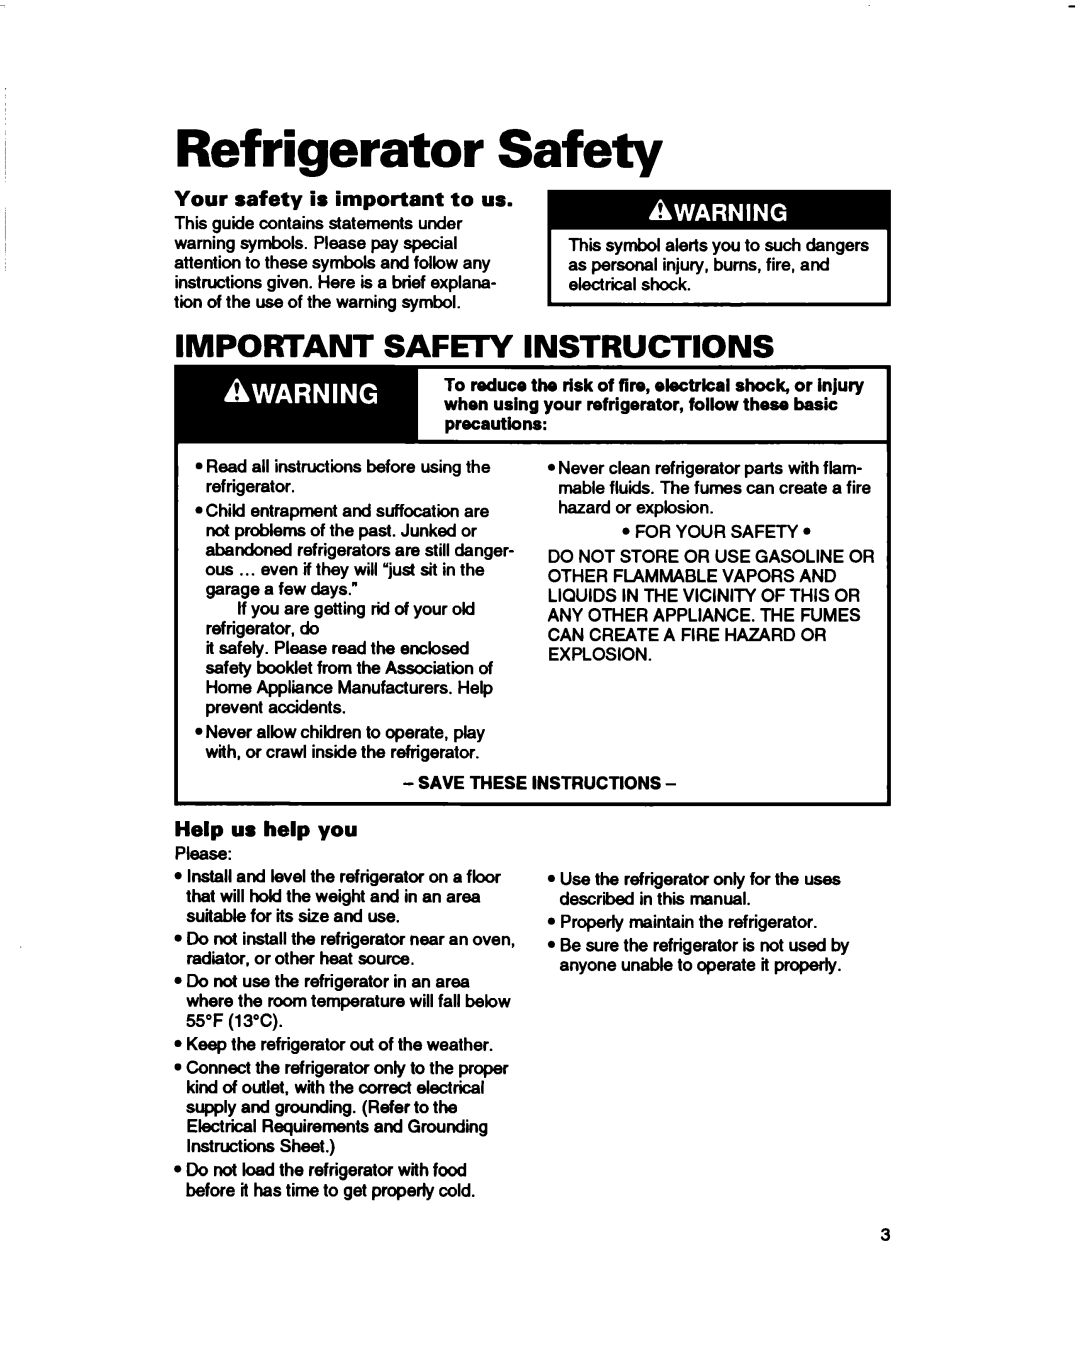 Estate 2173445 warranty Refrigerator Safety, IMPORTANT SAFEN INSTRUCTlONS, Your safety is important to us, Help us help you 